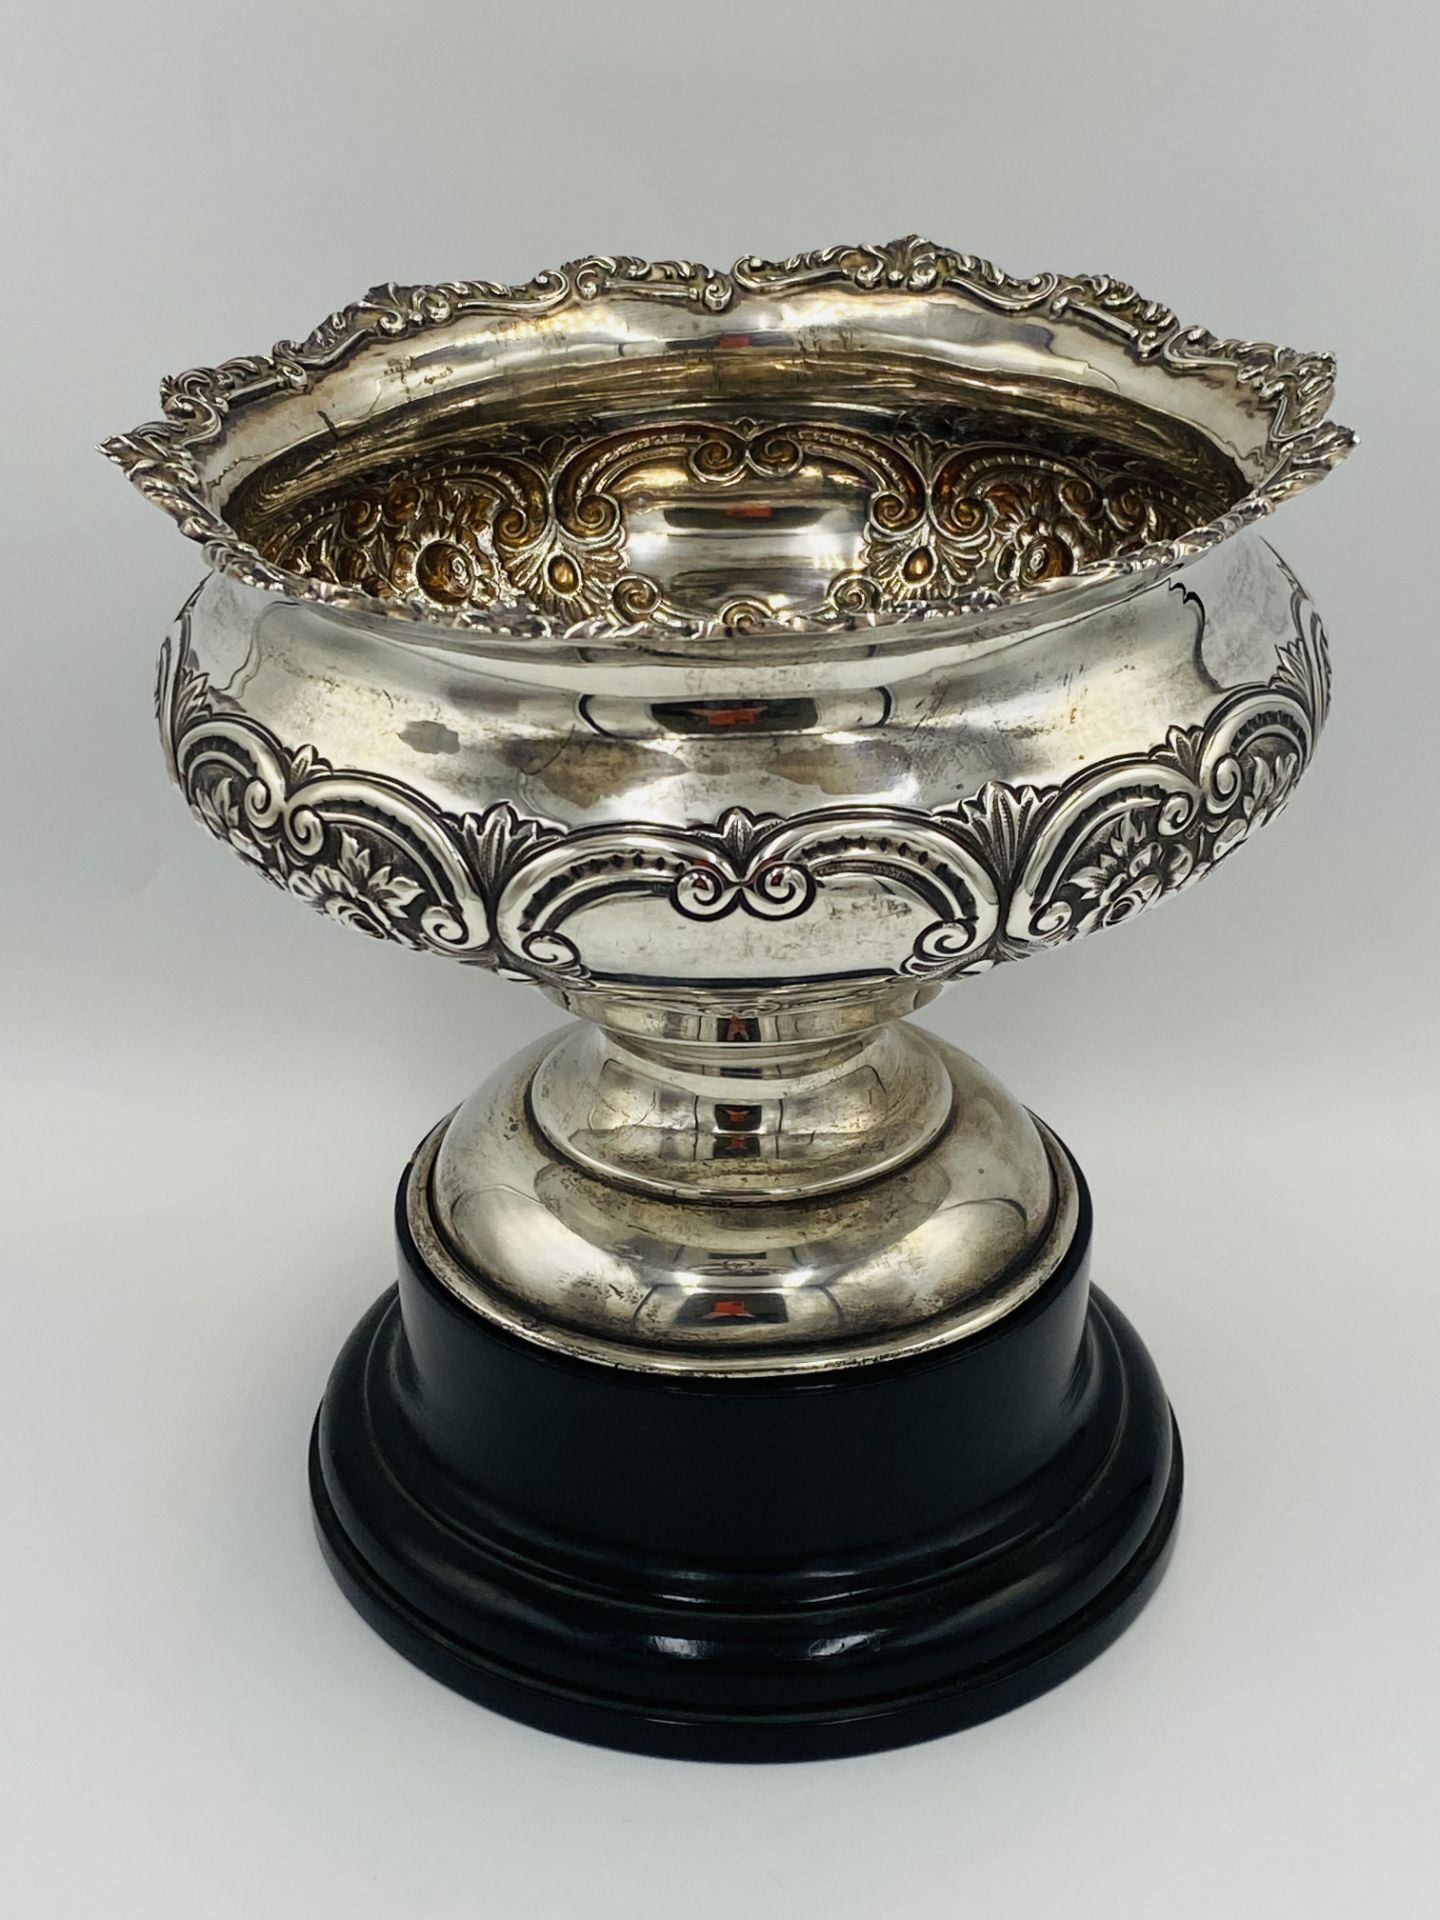 Silver bowl with repousse decoration - Image 2 of 9